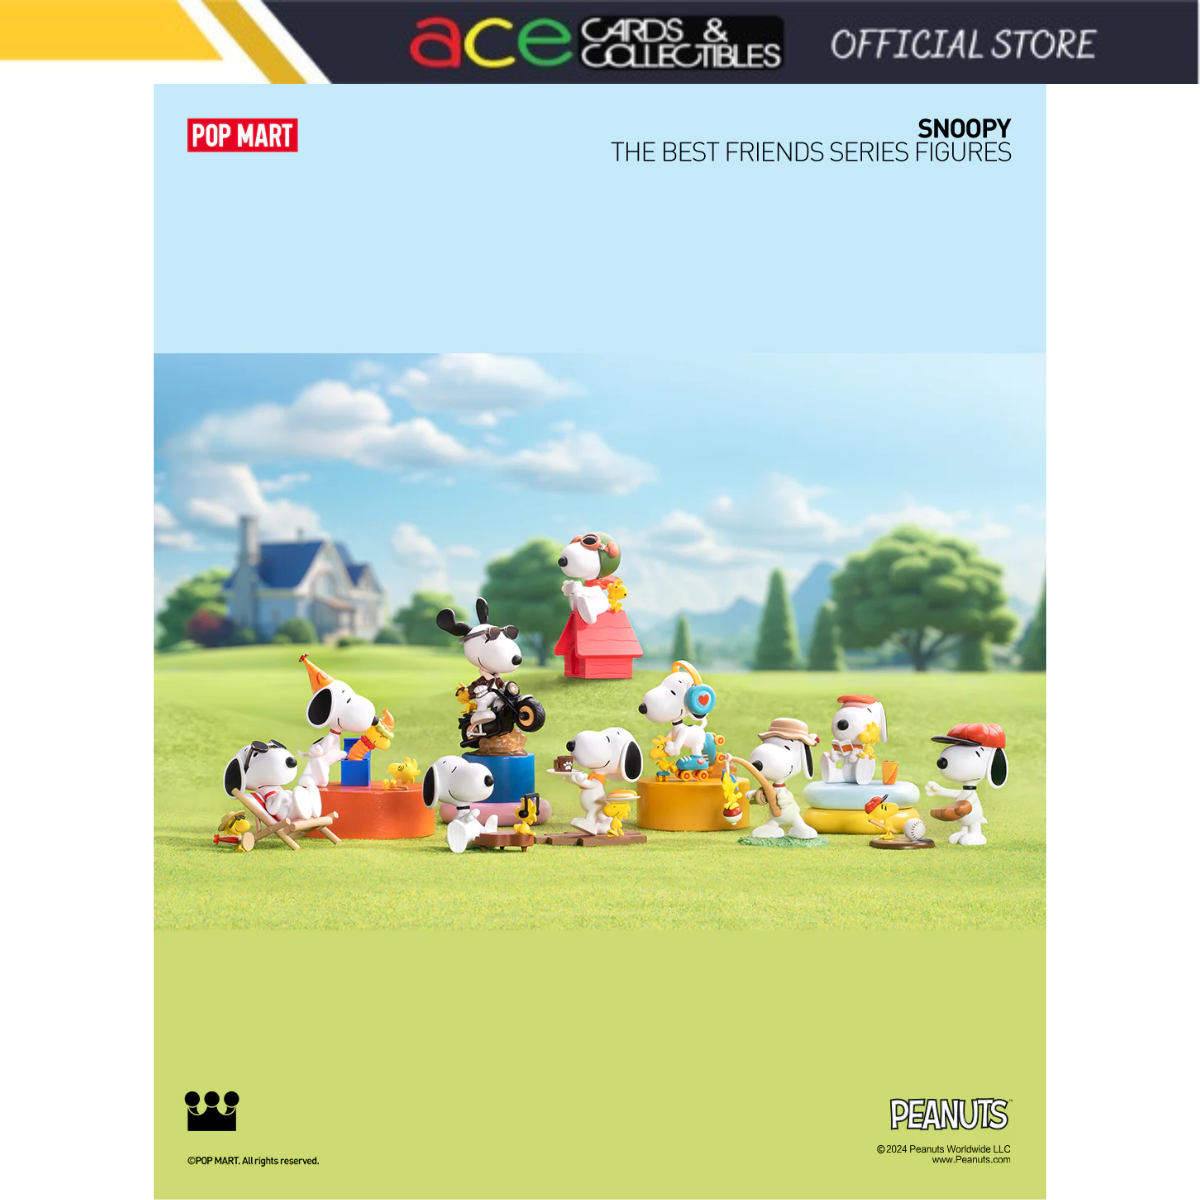 POP MART Snoopy The Best Friends Series-Single Box (Random)-Pop Mart-Ace Cards & Collectibles